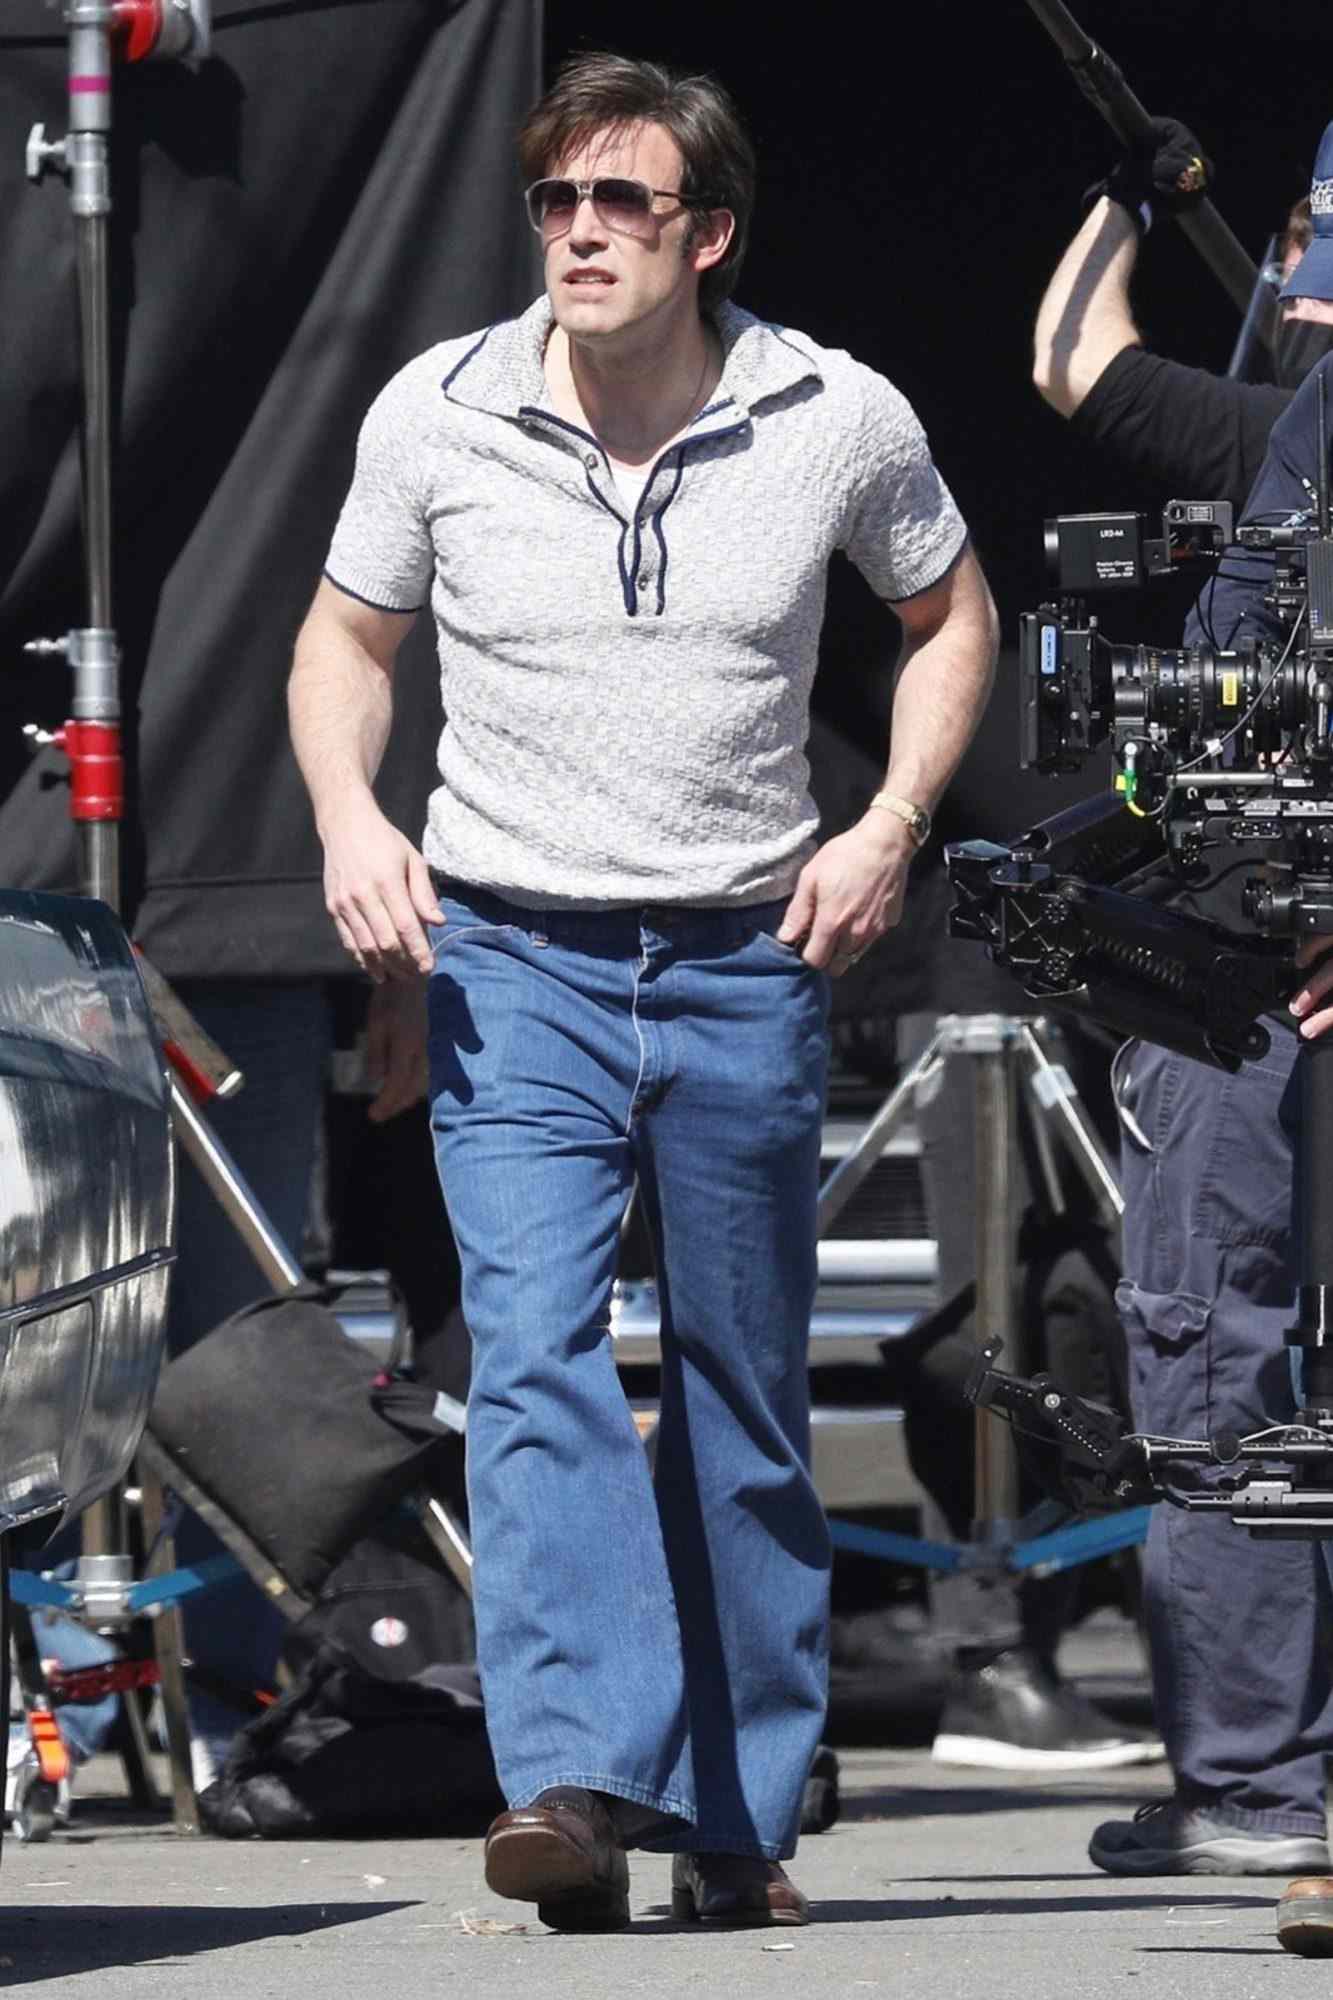 Ben Affleck sports a clean shaven new look as he is seen with director George Clooney on set of 'The Tender Bar'